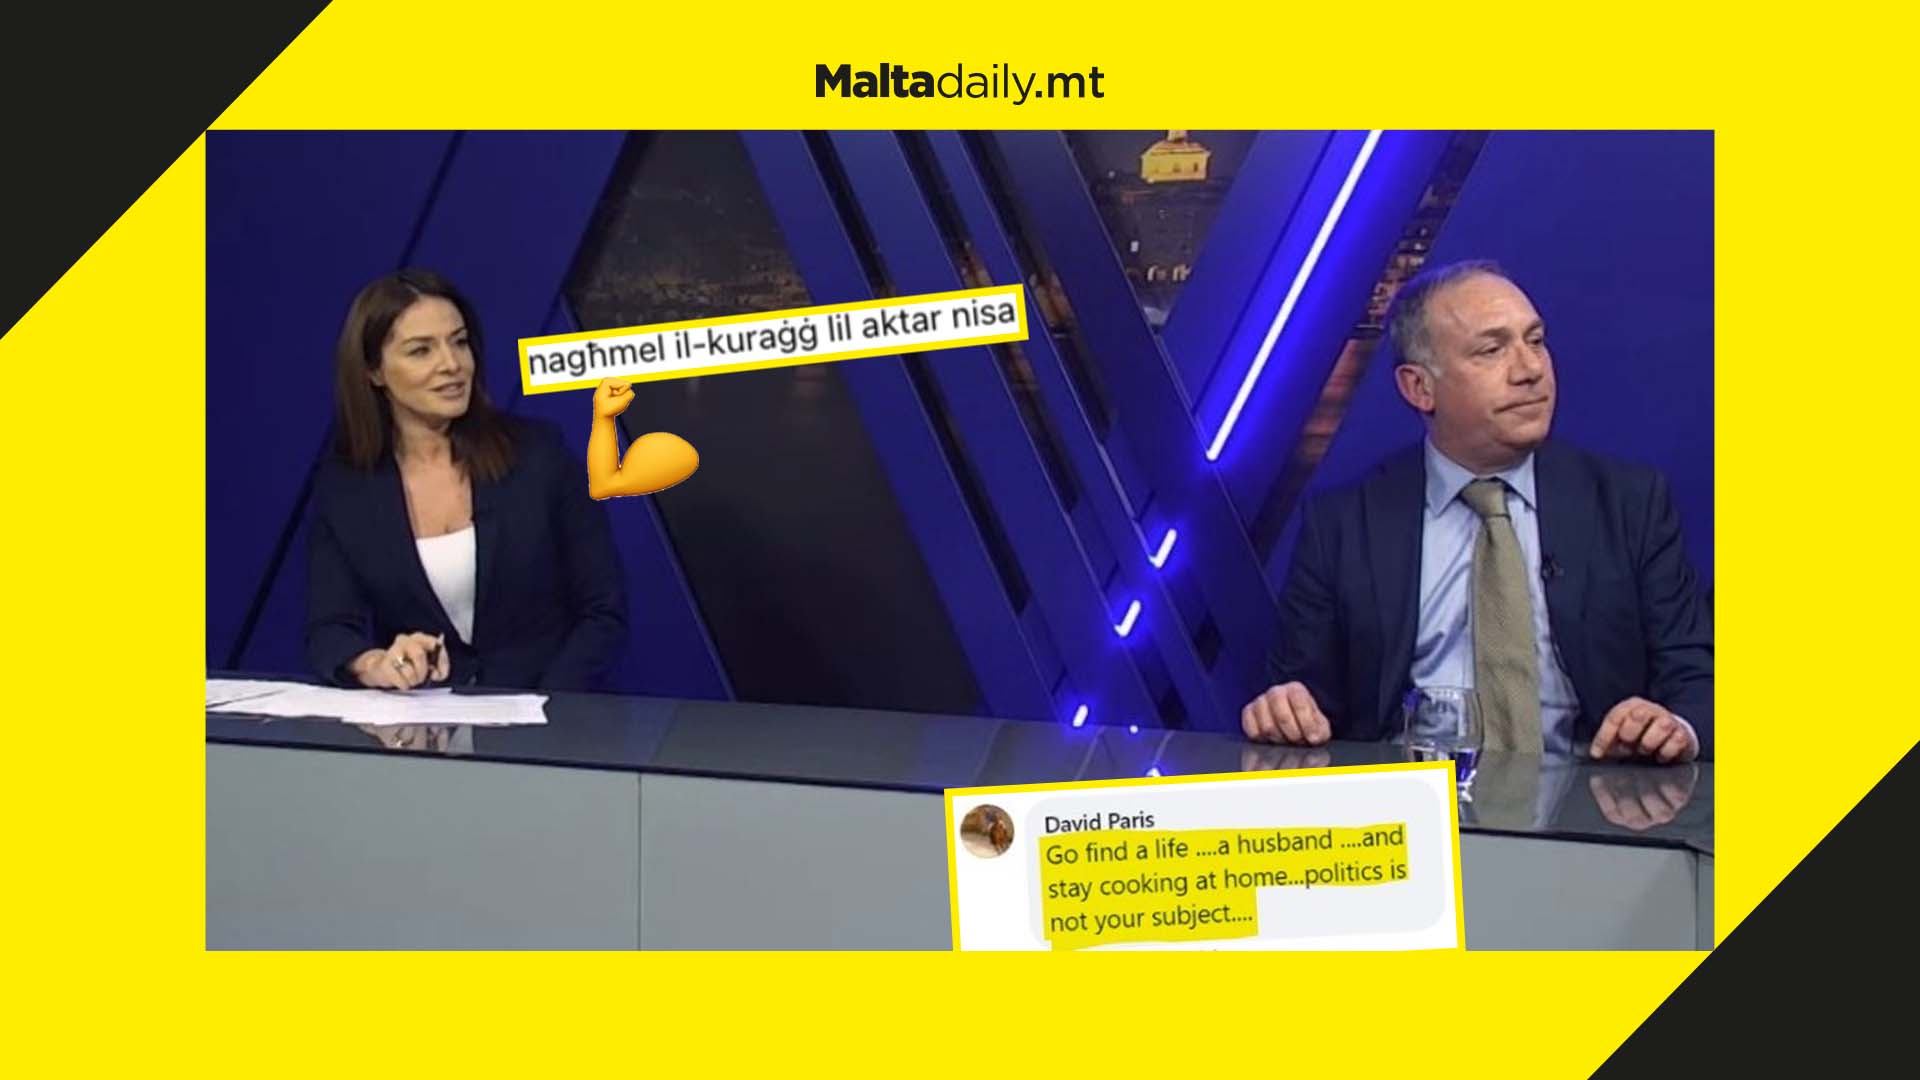 Miriam Dalli slams 'go find a husband & stay cooking at home' comments made on recent video